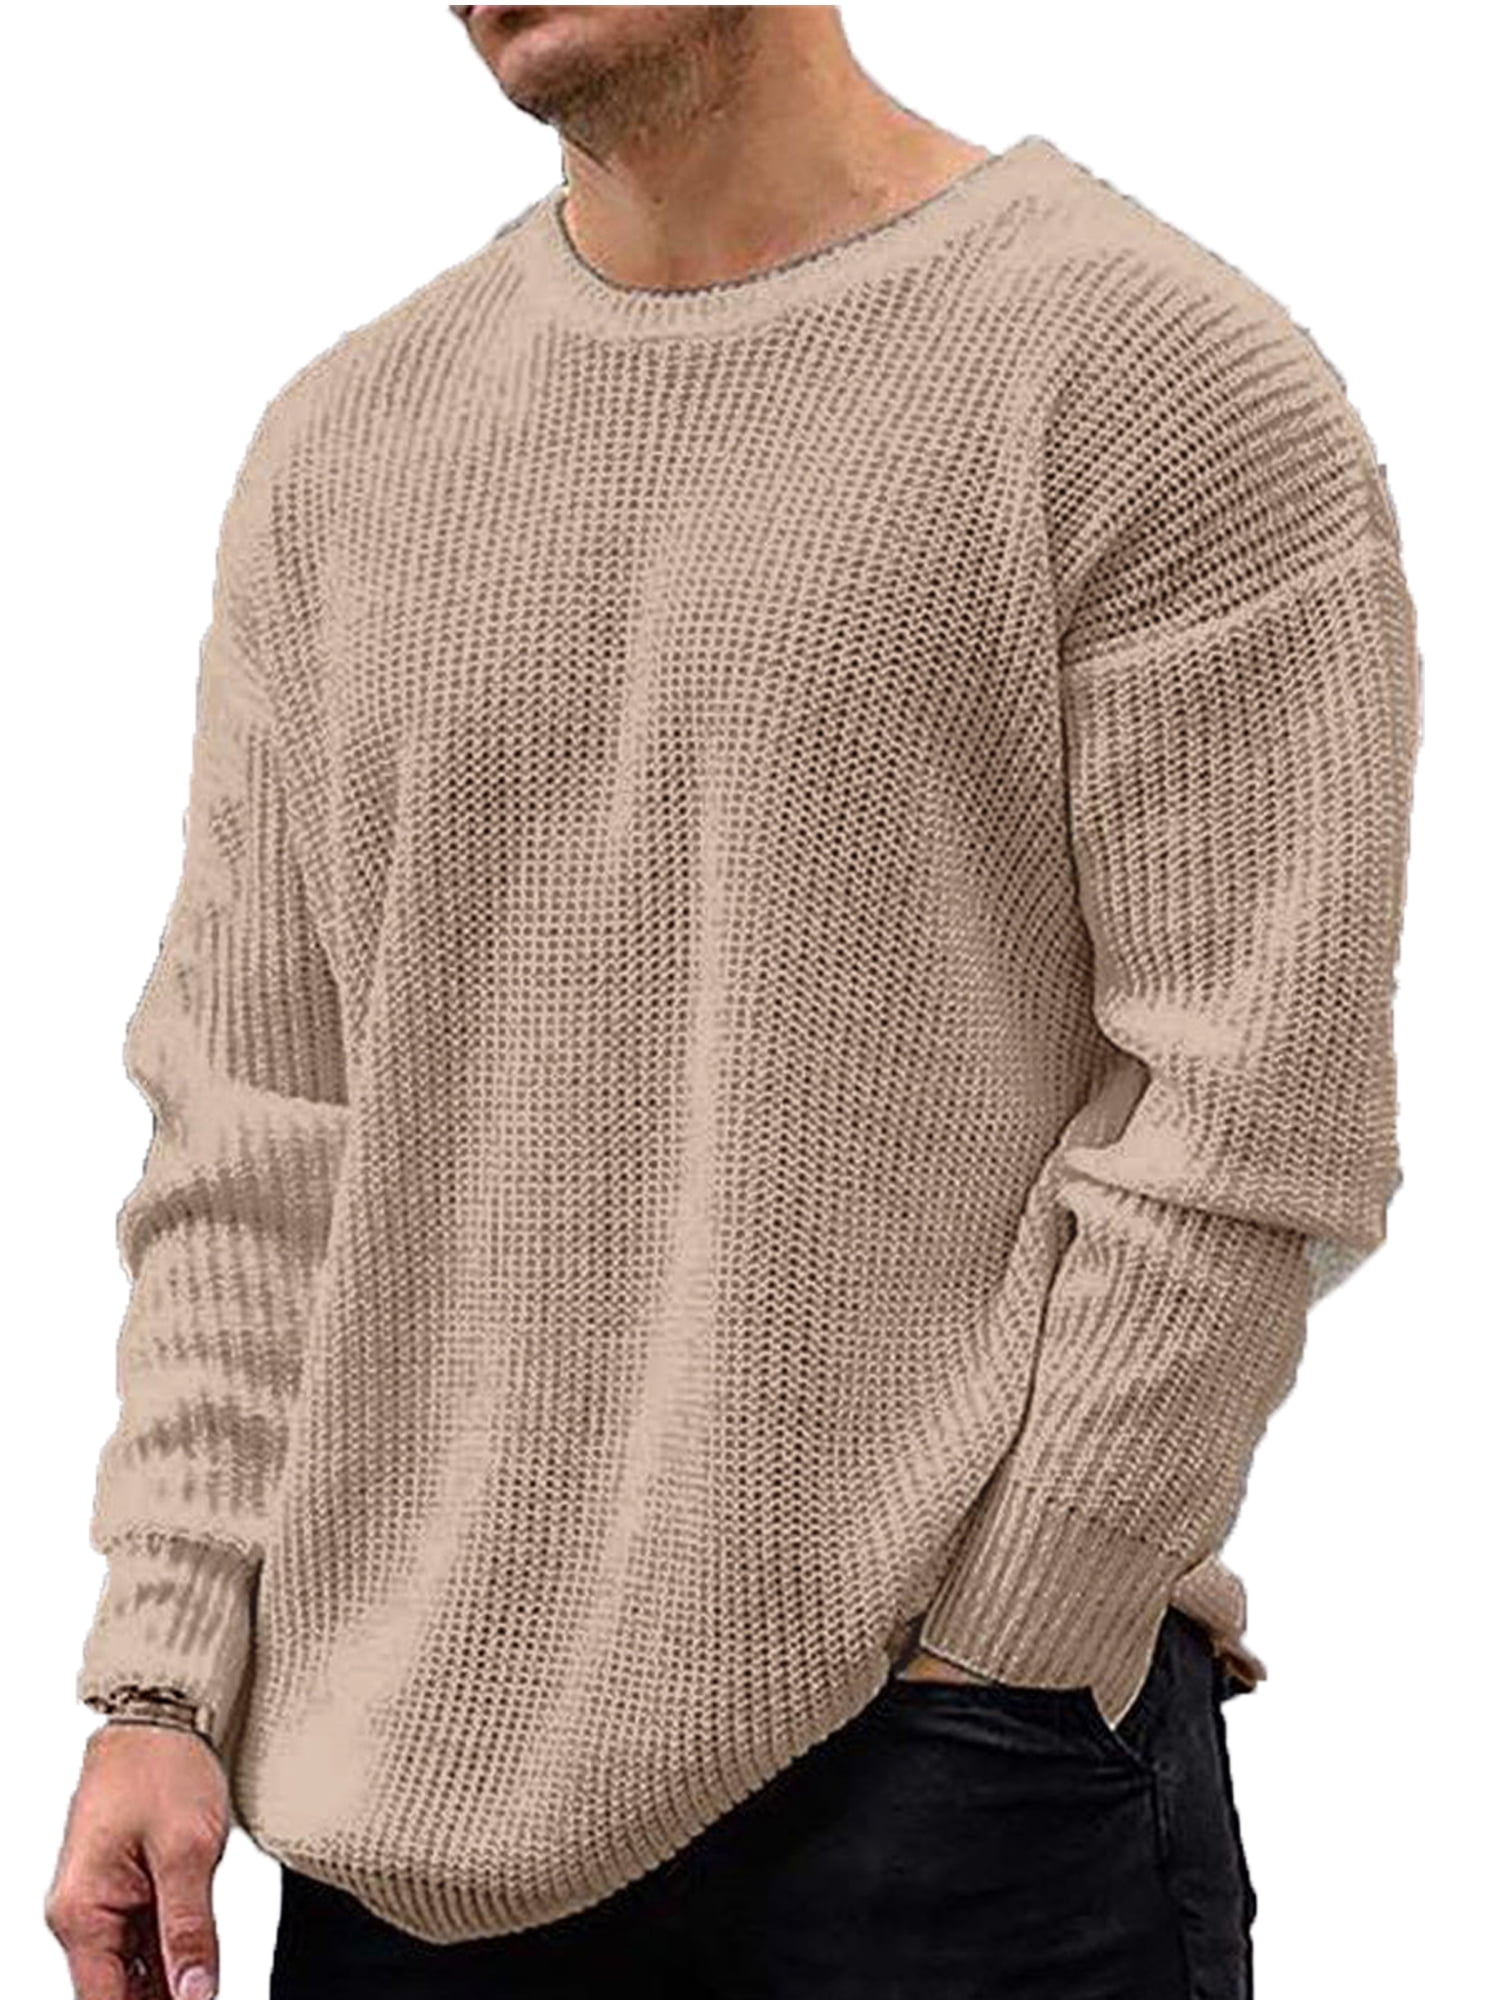 Fieer Mens Warm Crew Neck Solid Long Sleeve Knit Lounge Cozy Sweater Top 